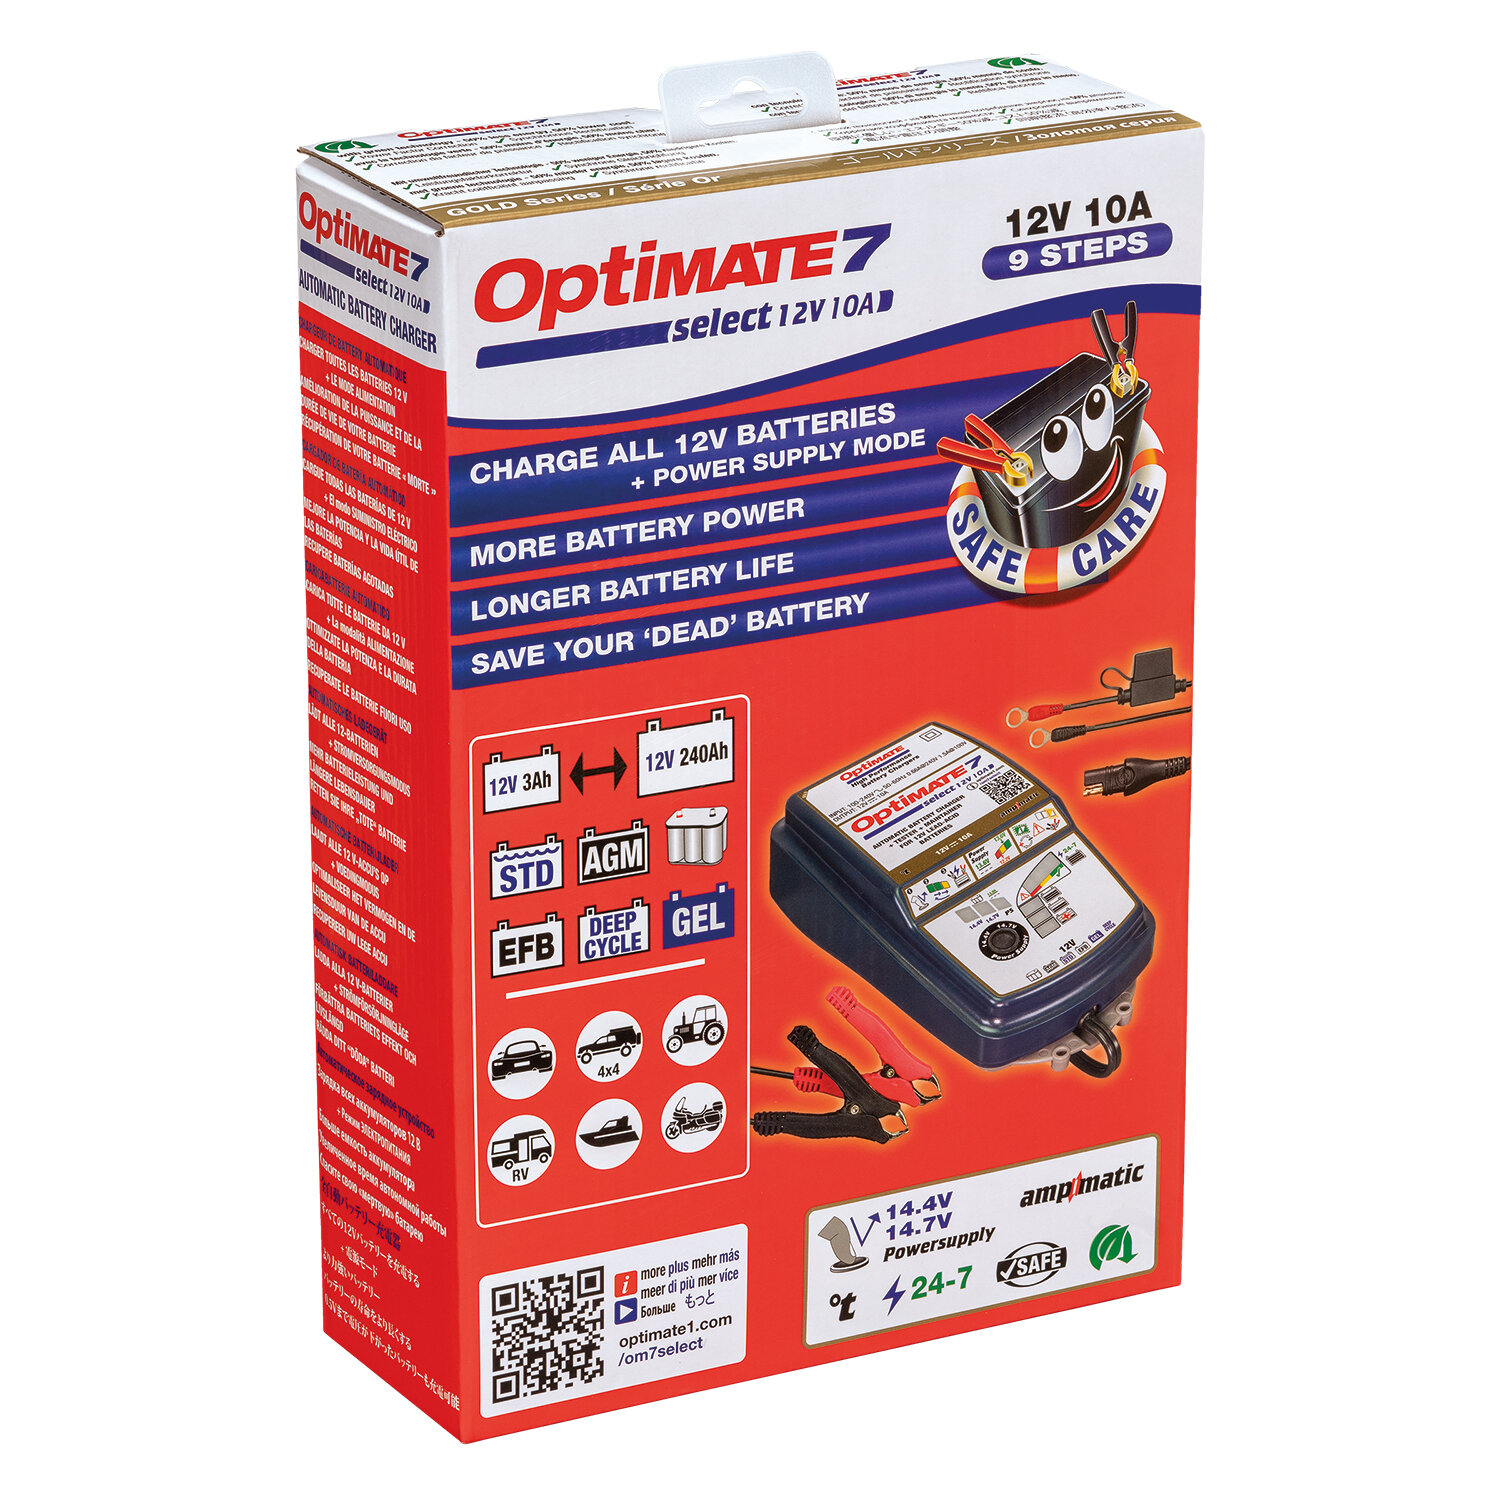 CHARGEUR OPTIMATE 7 SELECT 12V/10A TM250 